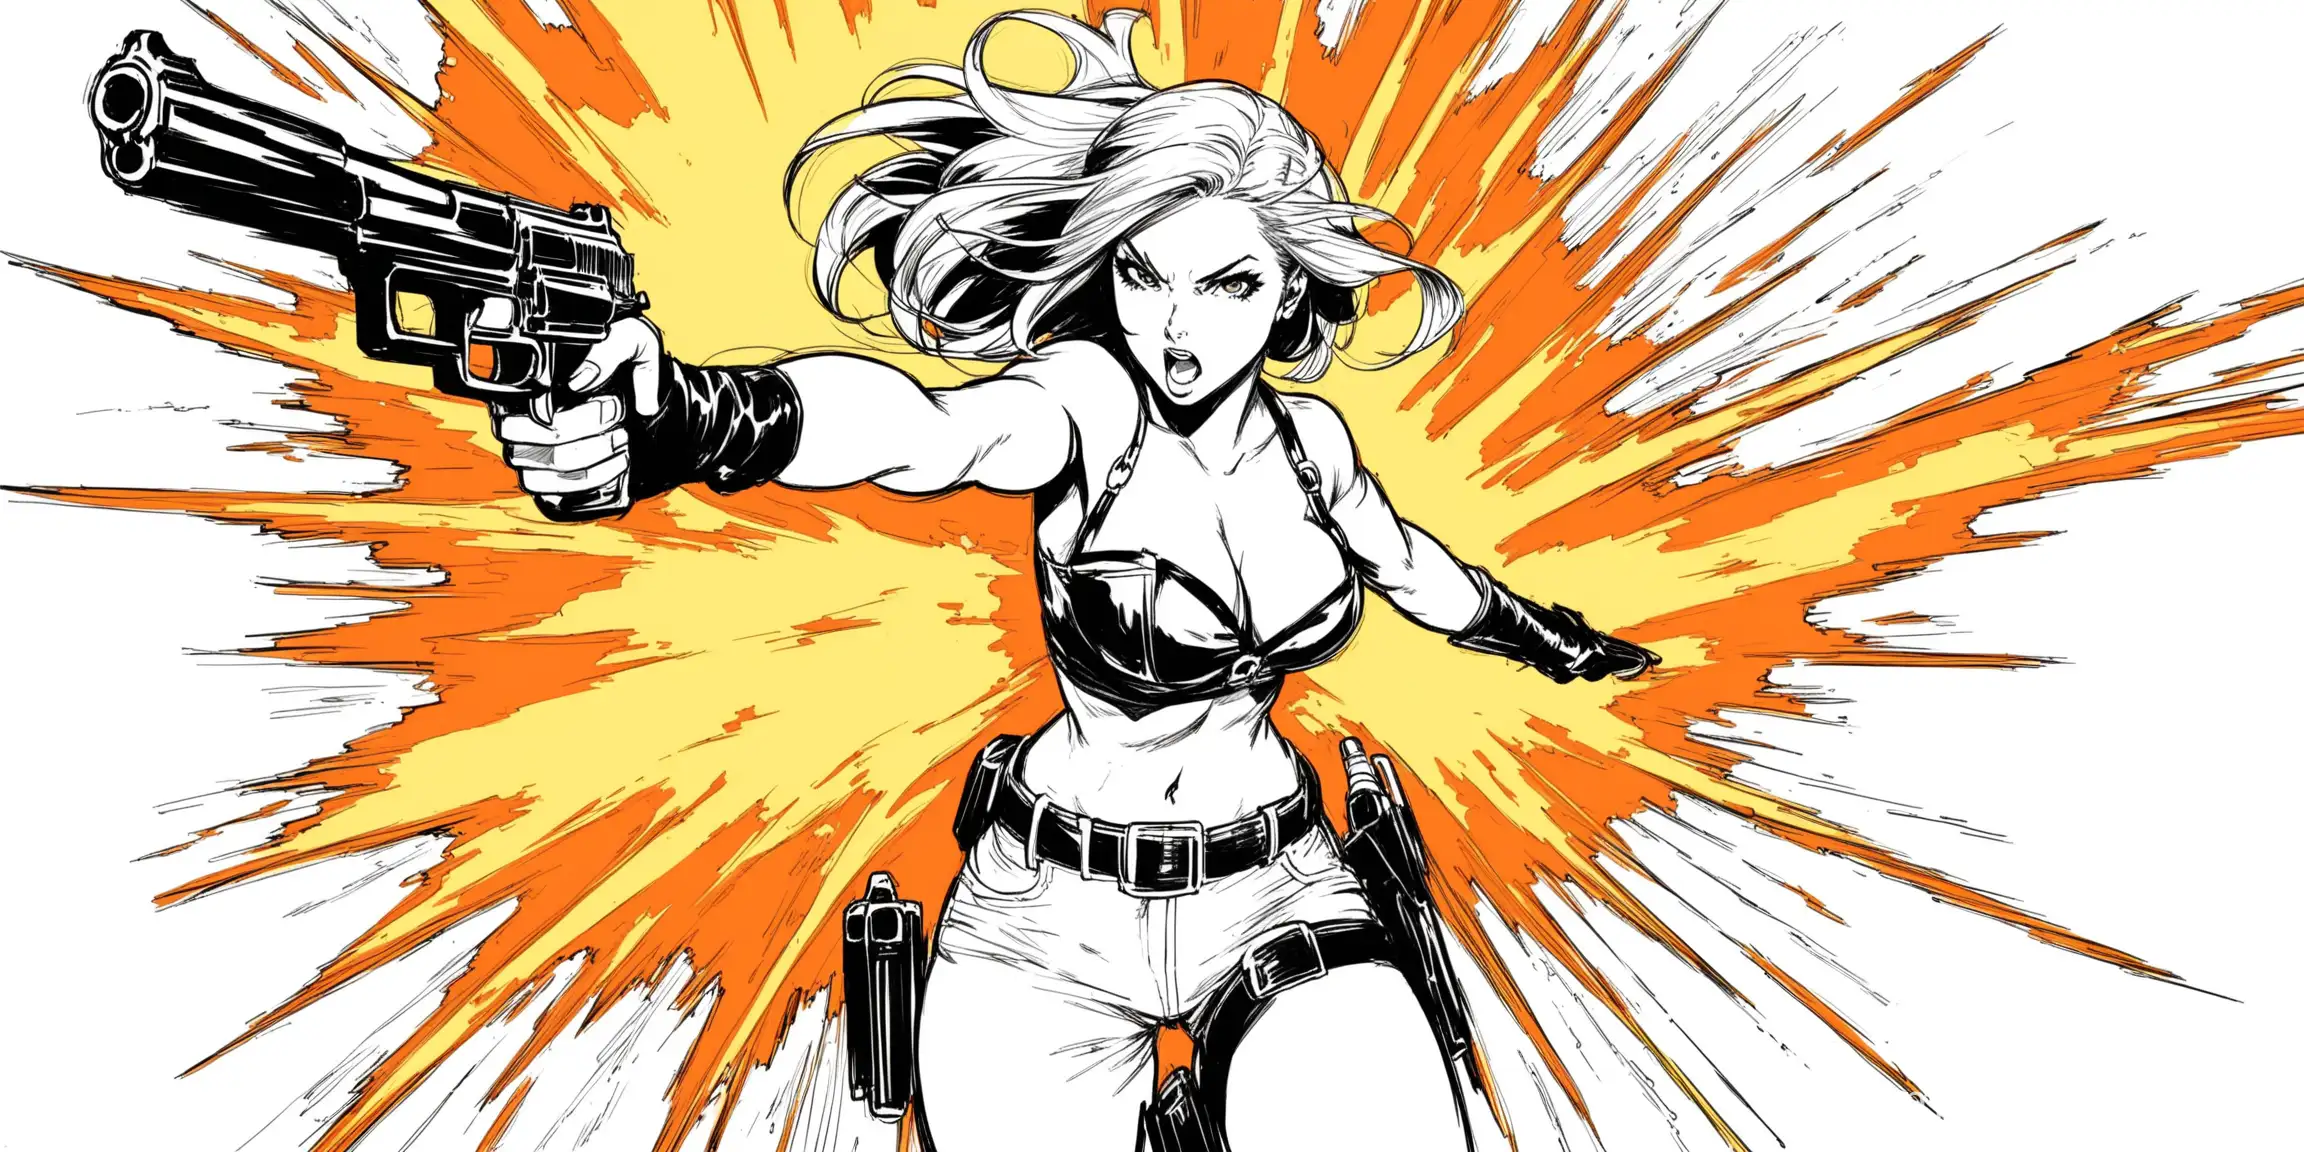 Dangerous Female Warrior with Twin Guns on White Background